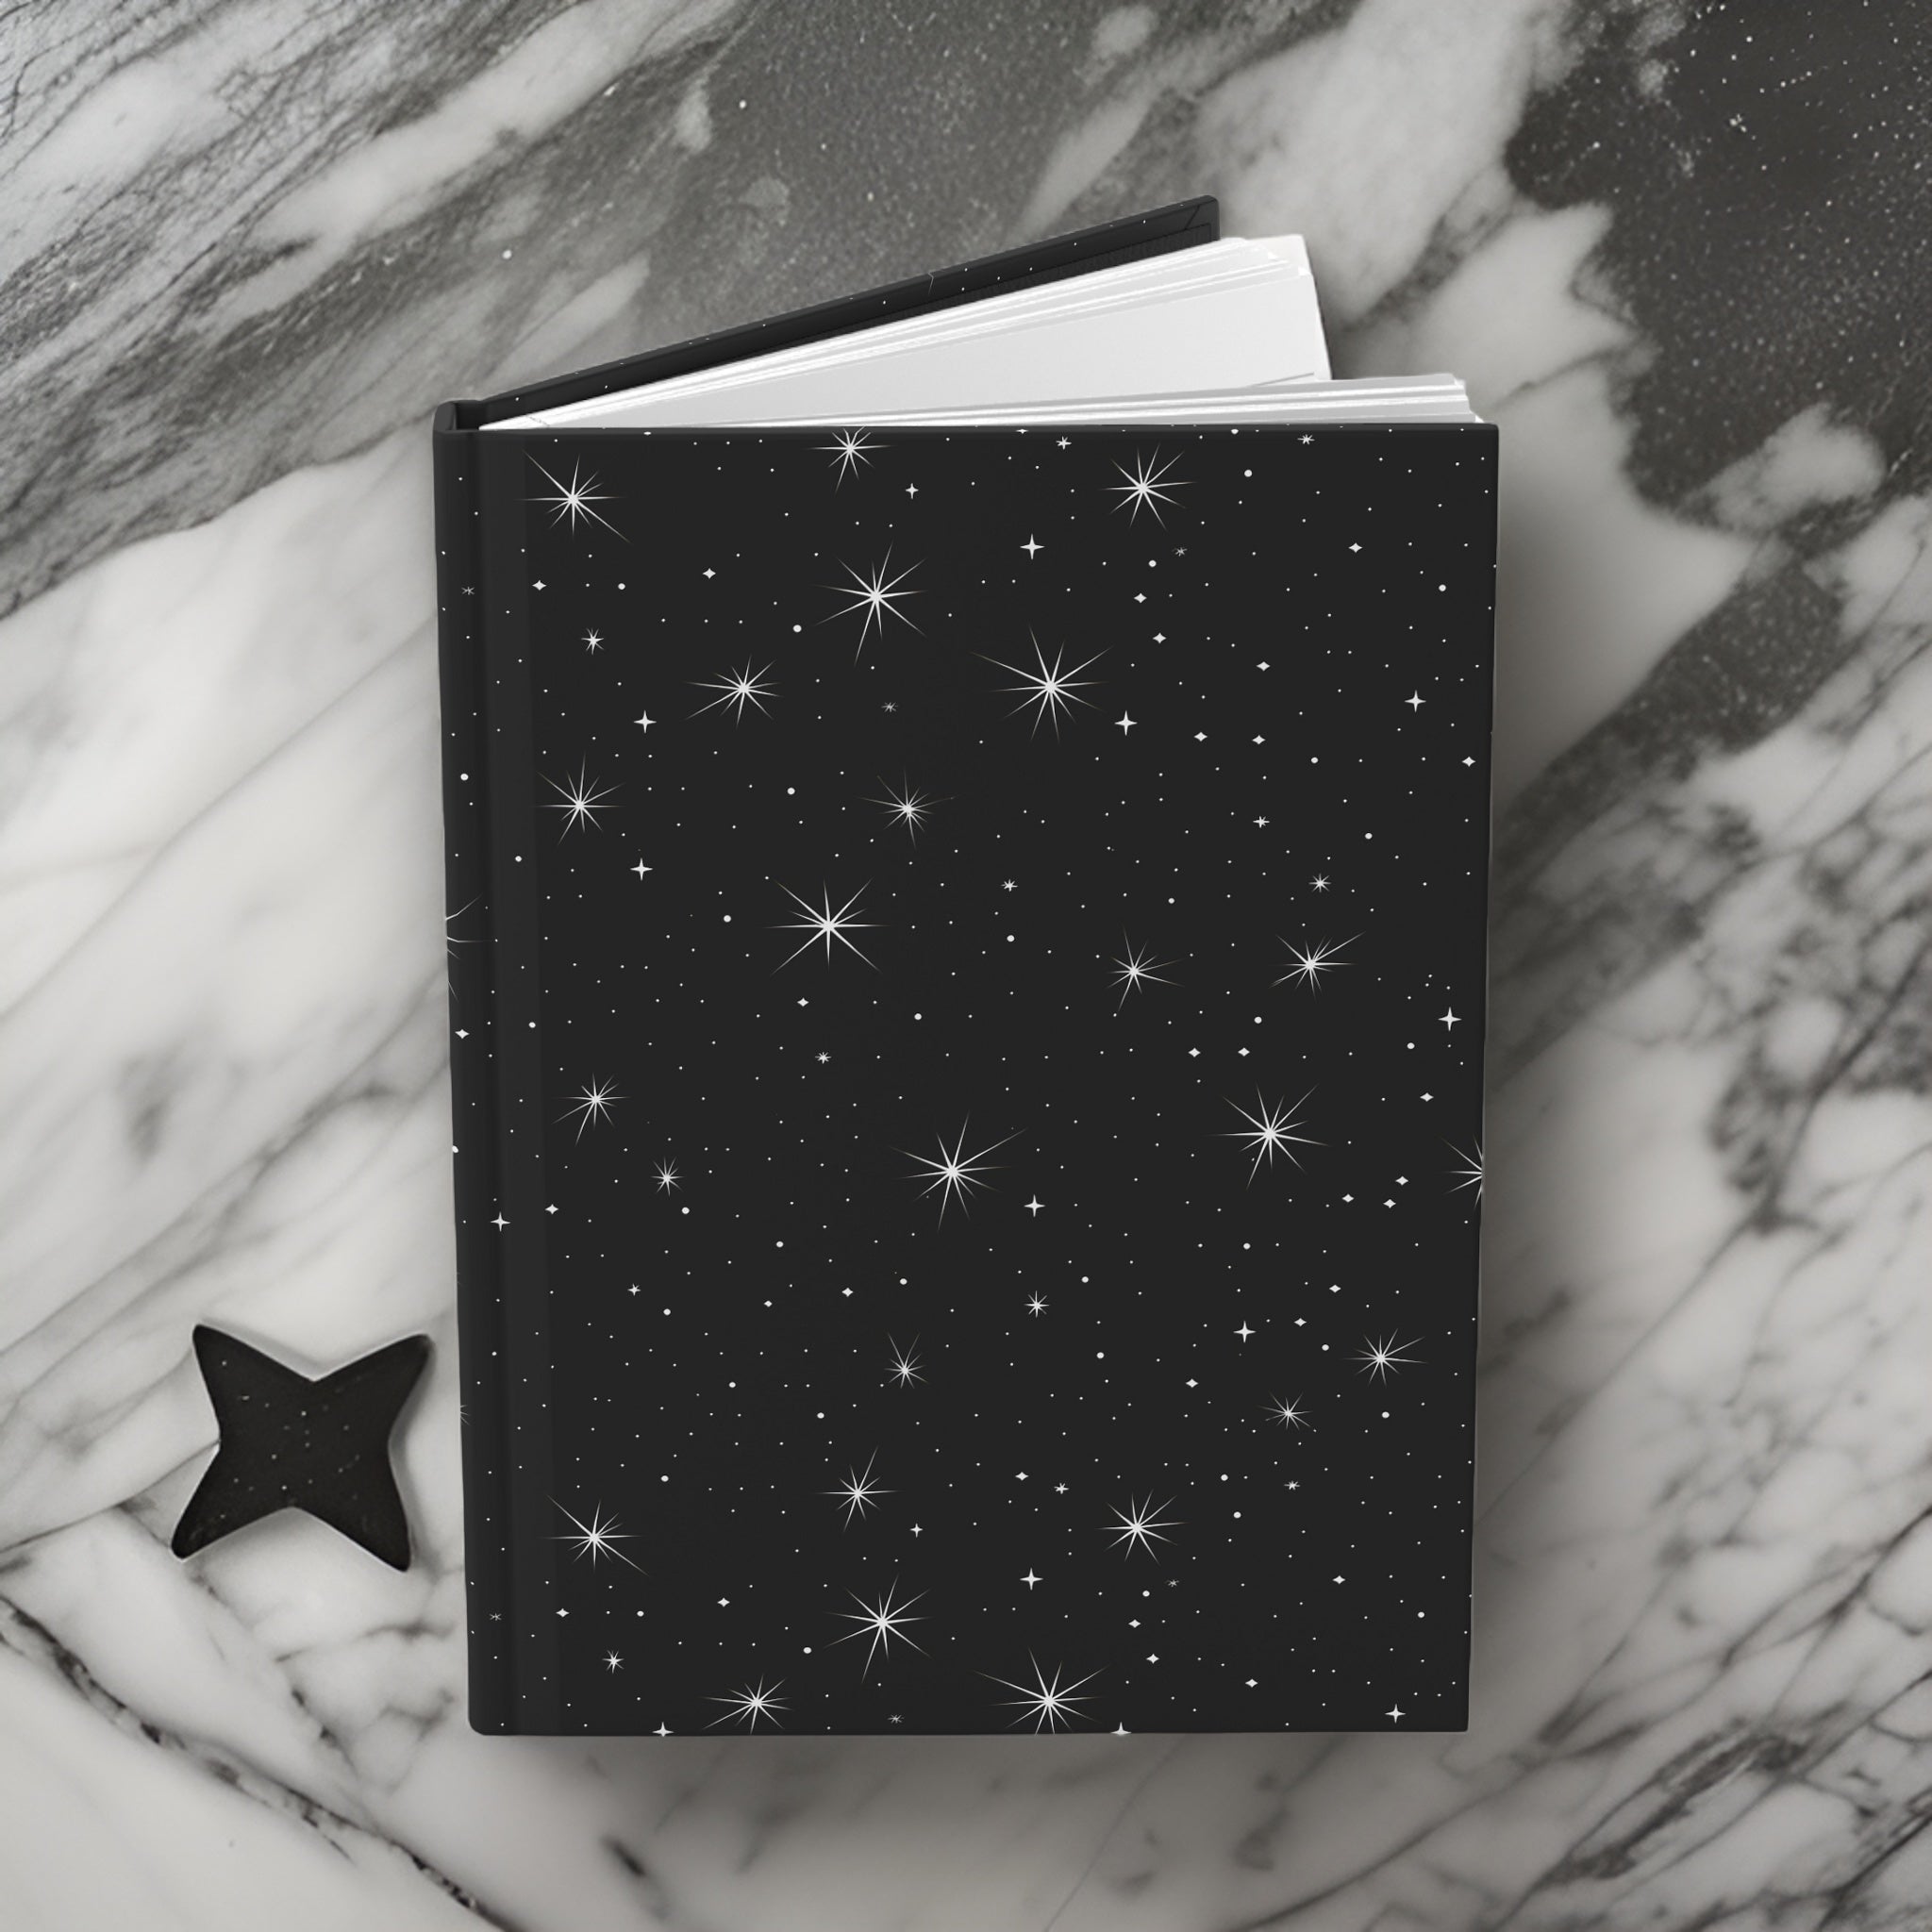 Starry Night Sky Journal: 8"x6" Lined Hardcover